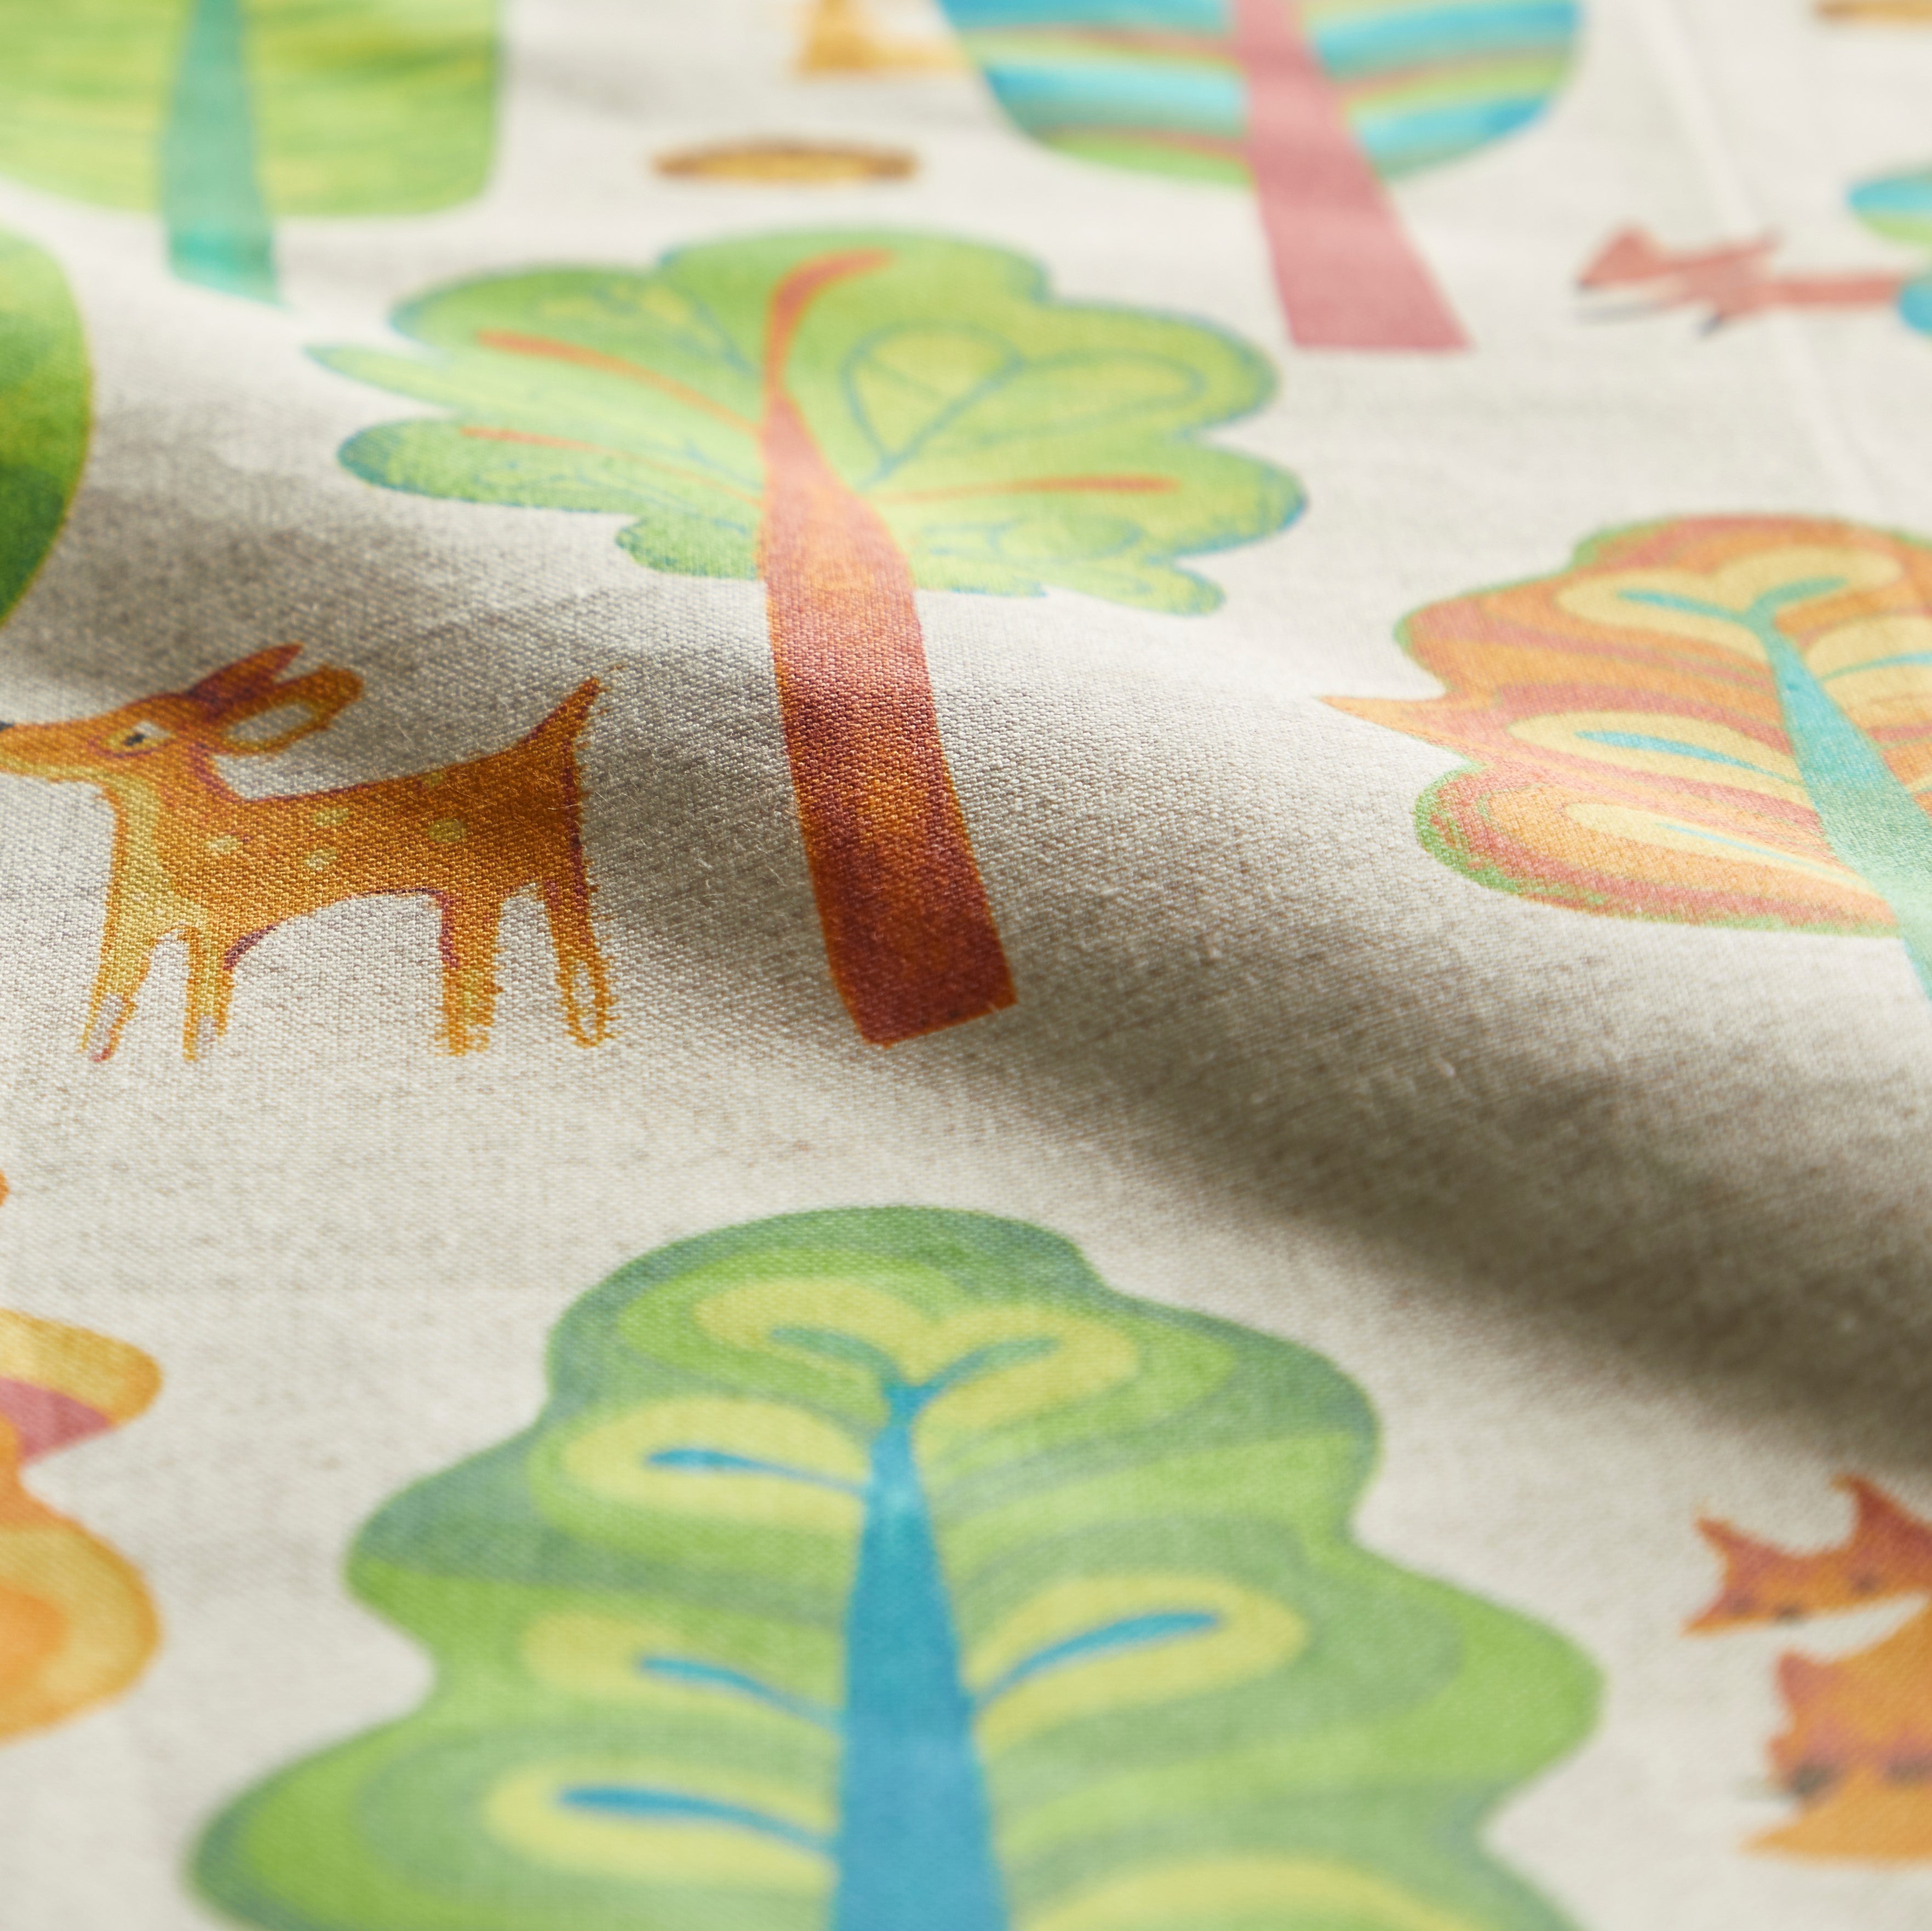 Funky Forest Made to Measure Curtains Funky Forest Multi